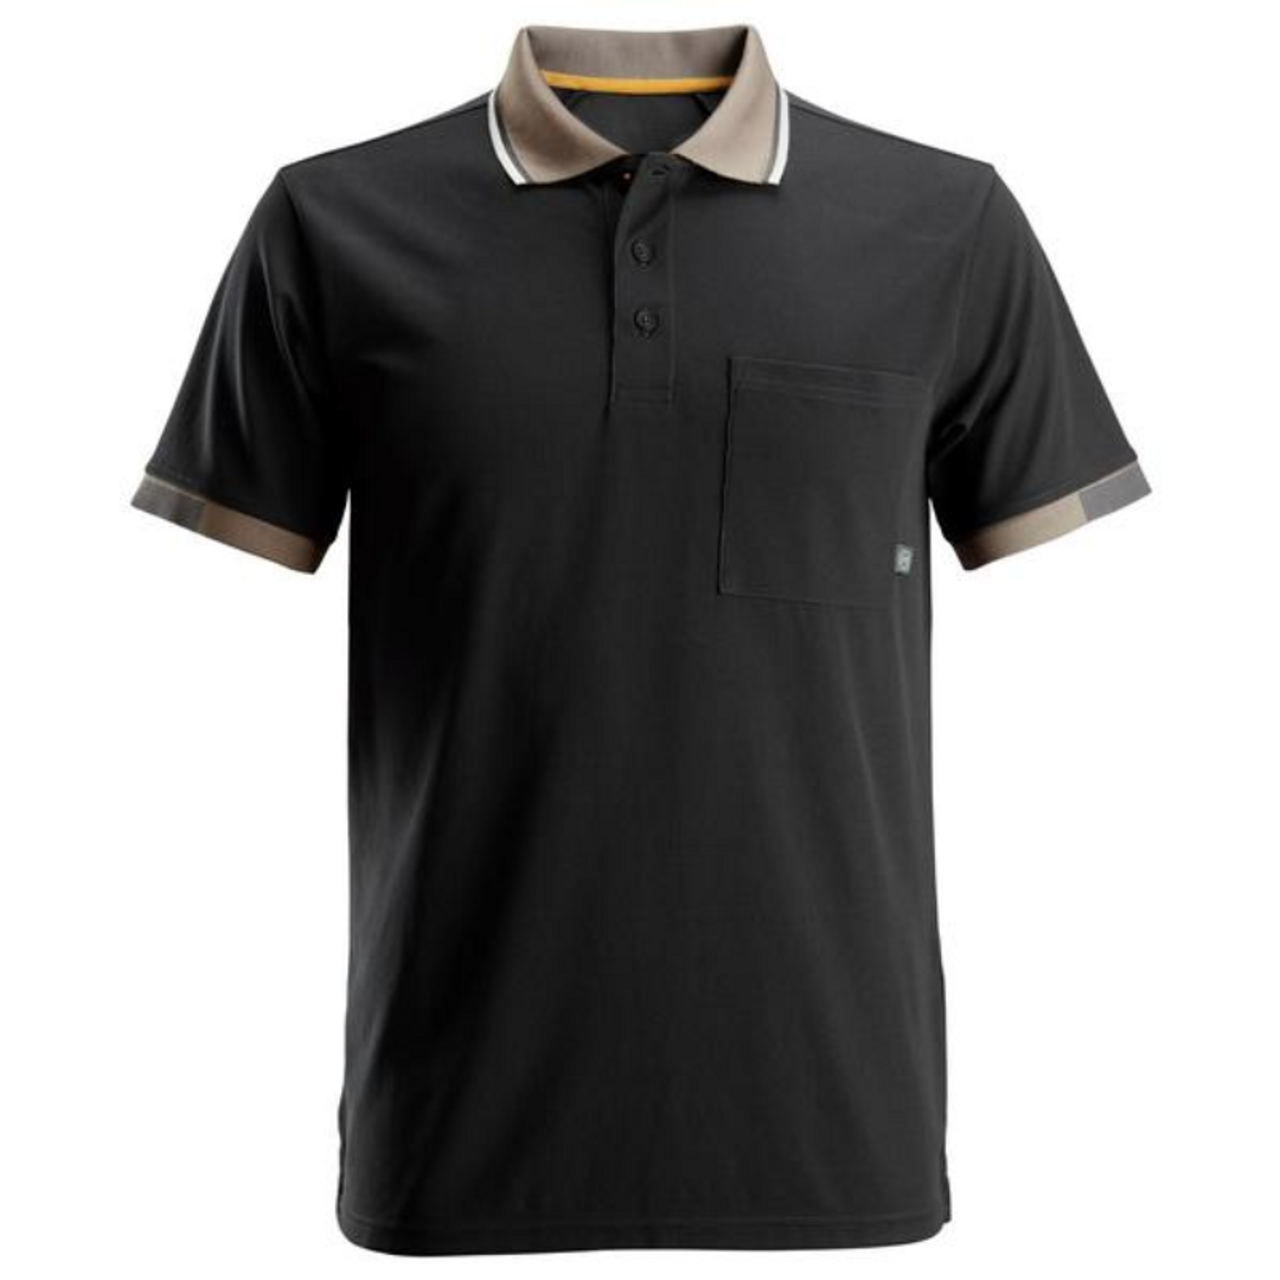 SNICKERS Polo Shirt | Supplier of 2724 Black 37.5 Performance for Work Shirts, Golf Shirts, Branded Workwear, Work Uniforms and even Sailing.